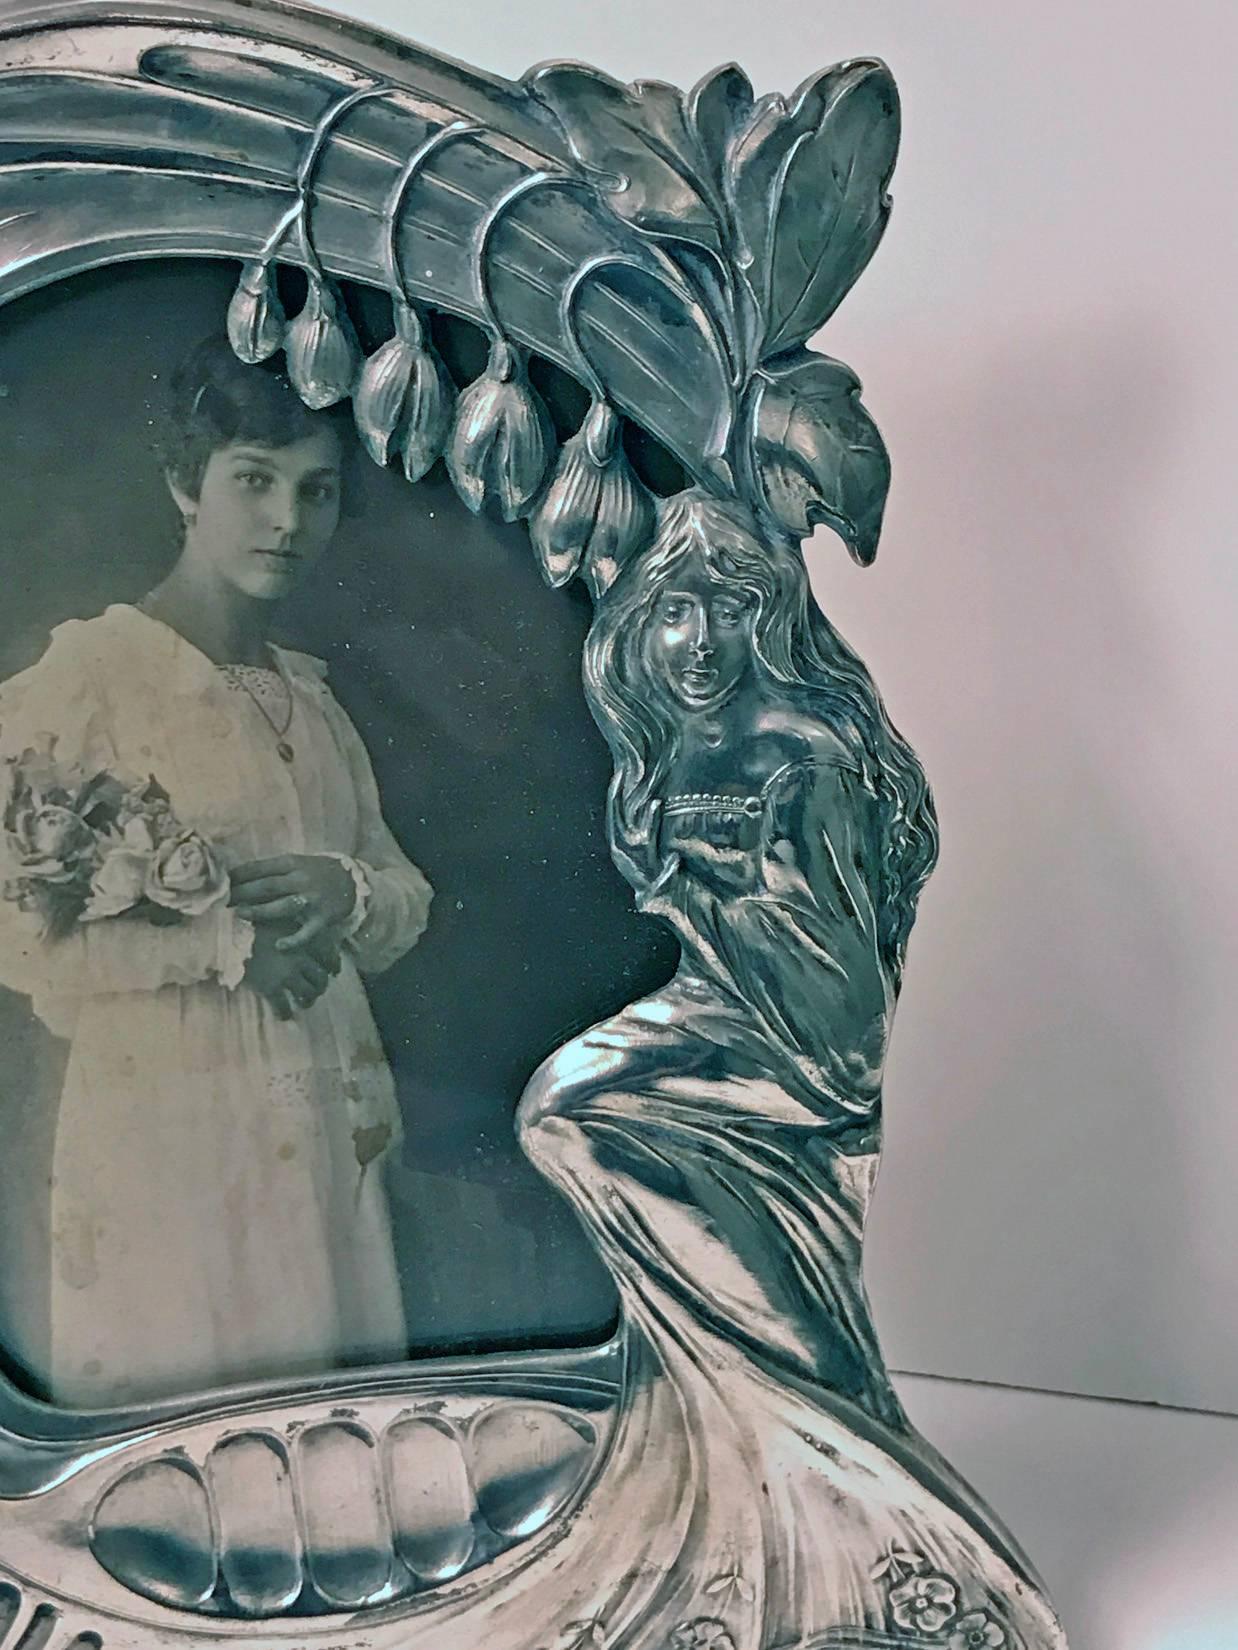 Rare design Art Nouveau pewter Photograph Frame, Austria, Argentor, C.1900, stamped M.H. with eagle, Max Hacger. The frame depicting lady amidst floral decoration with flowing hair and dress. Stamped on reverse. With eagle mark MH. Overall:- Height: